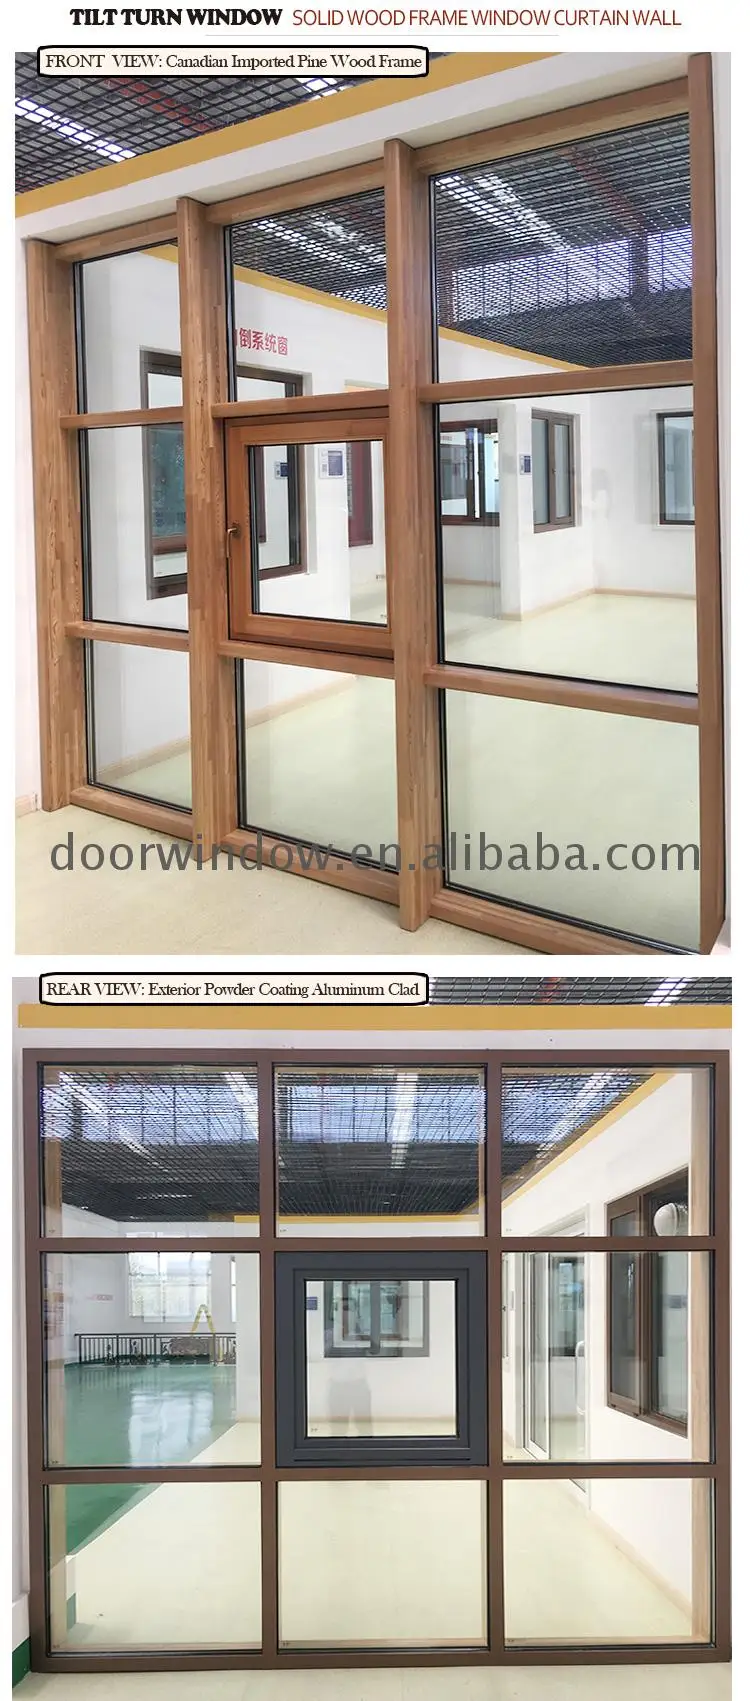 Tempered glass curtain wall structural reflection